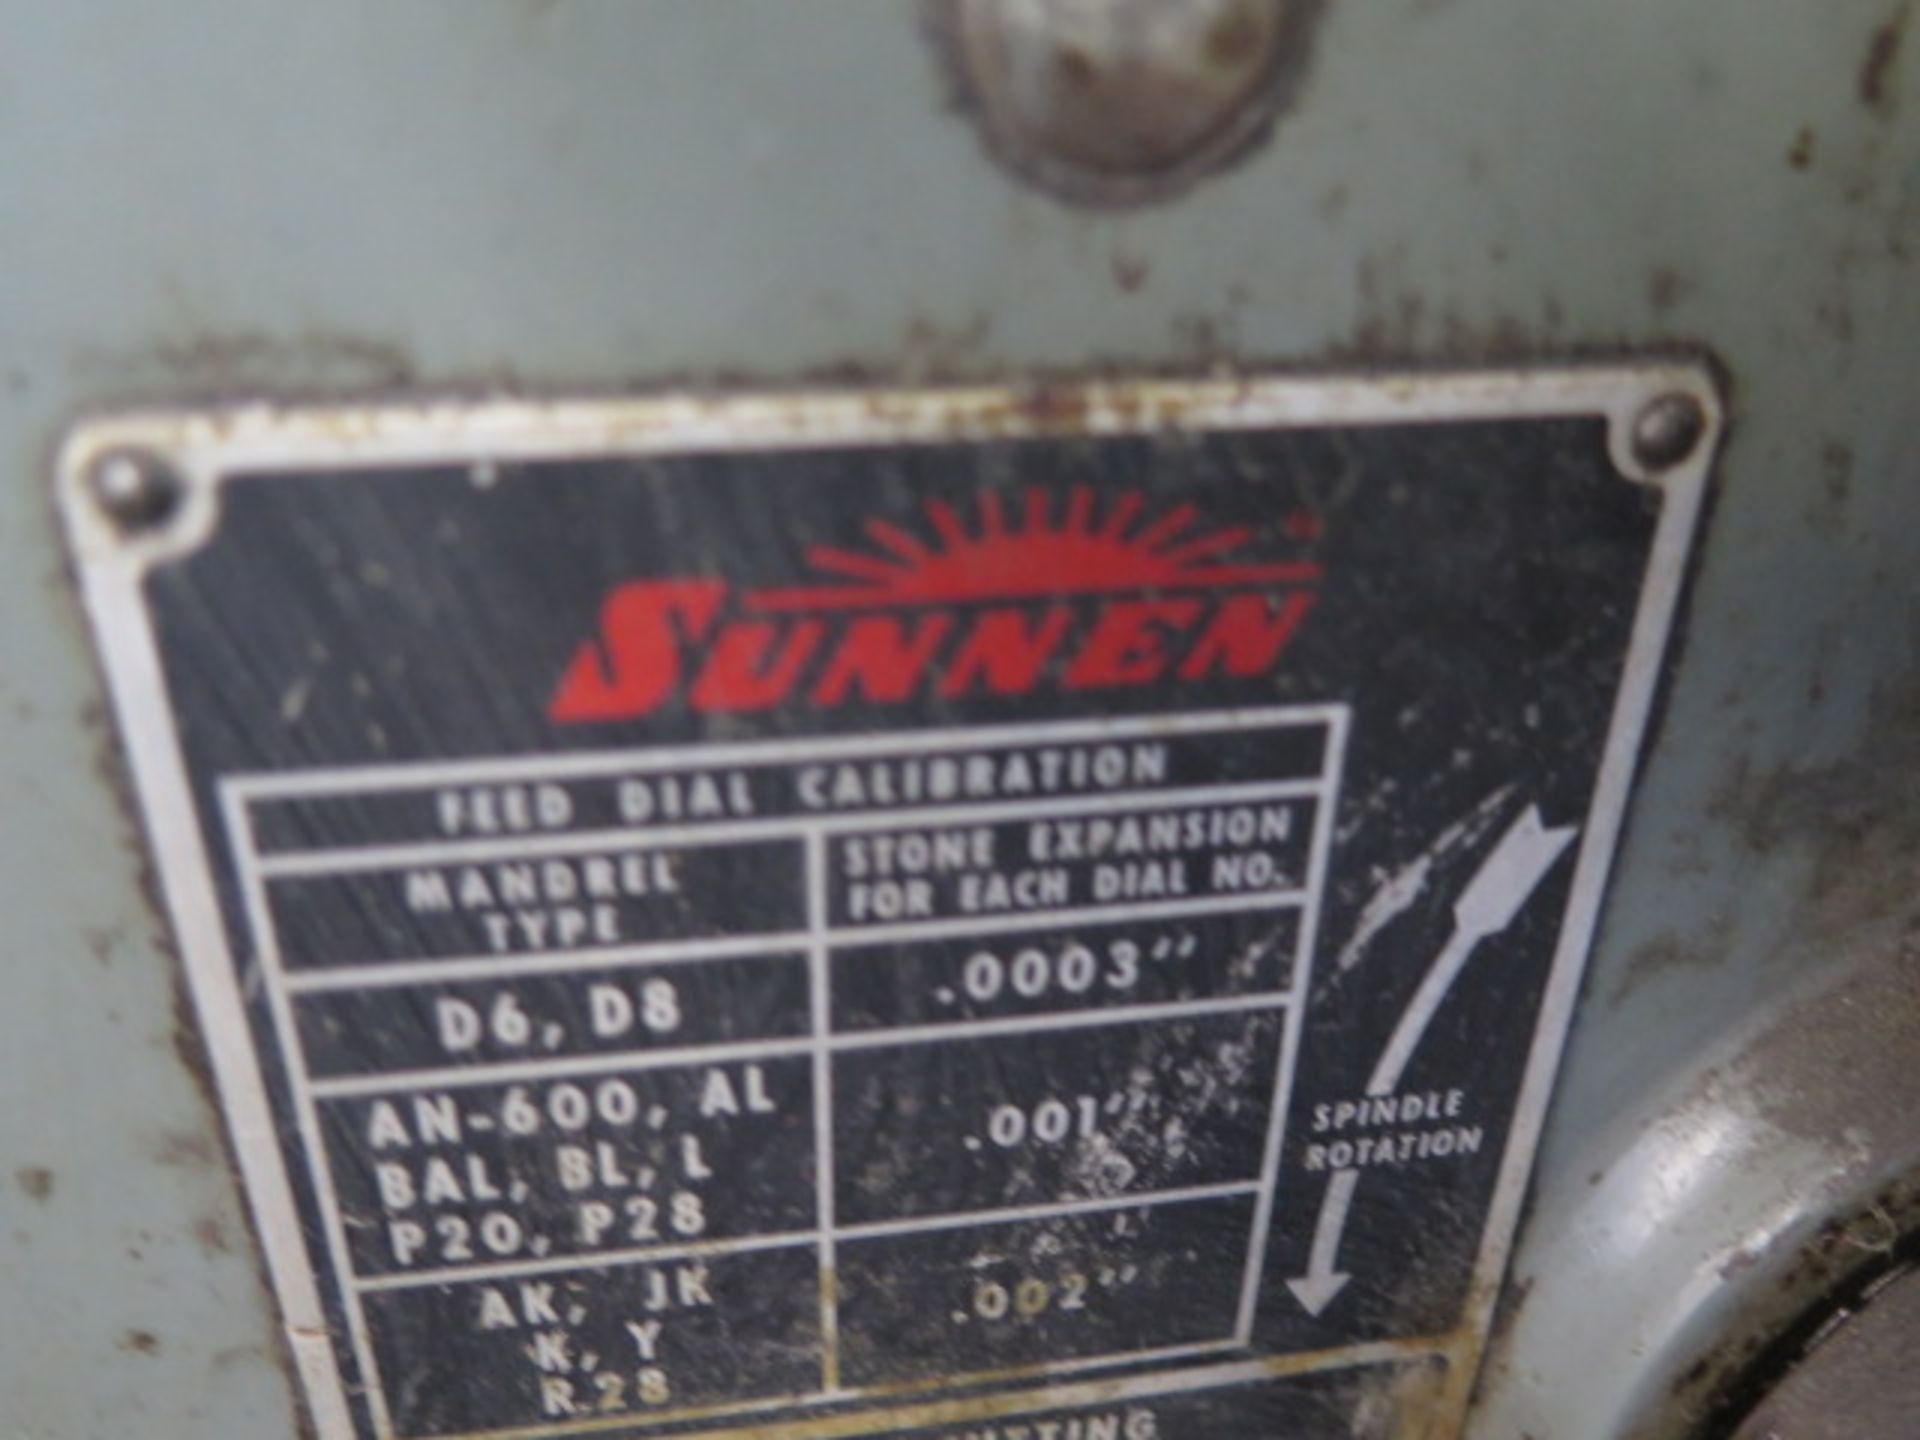 Sunnen MBB-1600 Precision Honing Machine s/n 43802 w/ Coolant (SOLD AS-IS - NO WARRANTY) - Image 4 of 8